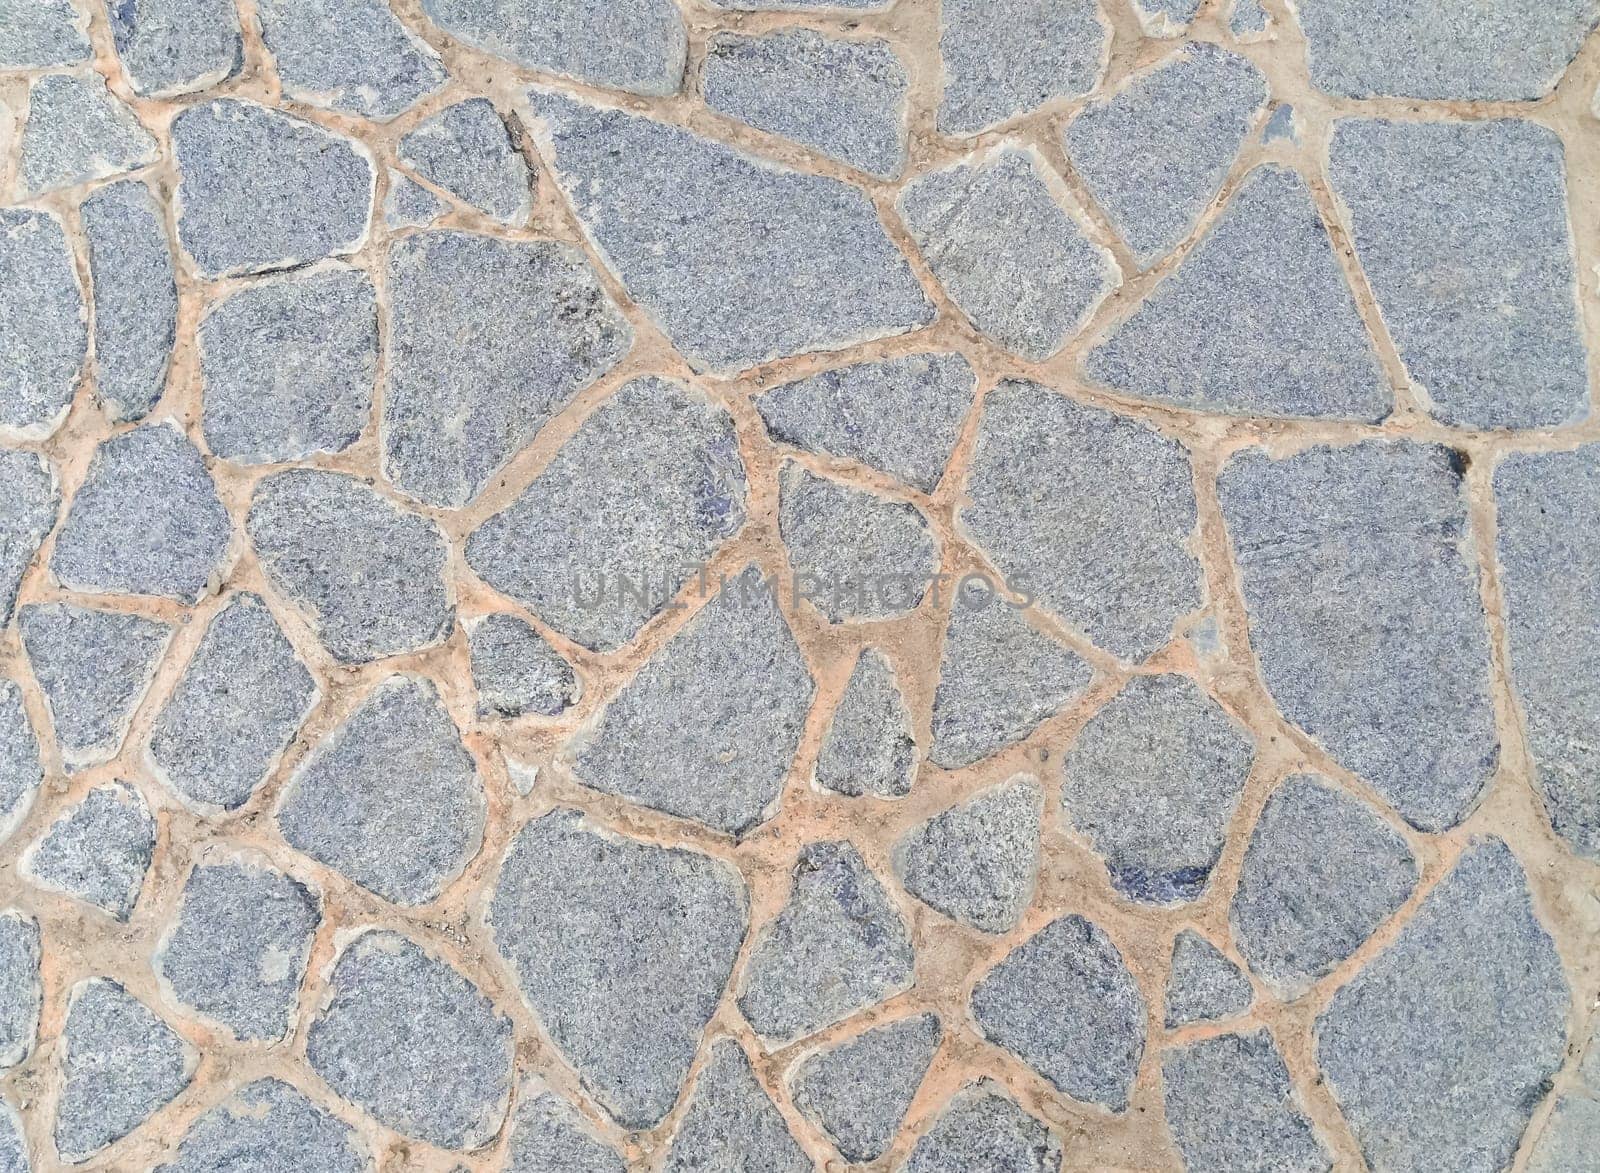 A stone wall with a lot of small stones. The wall is gray and has a rough texture